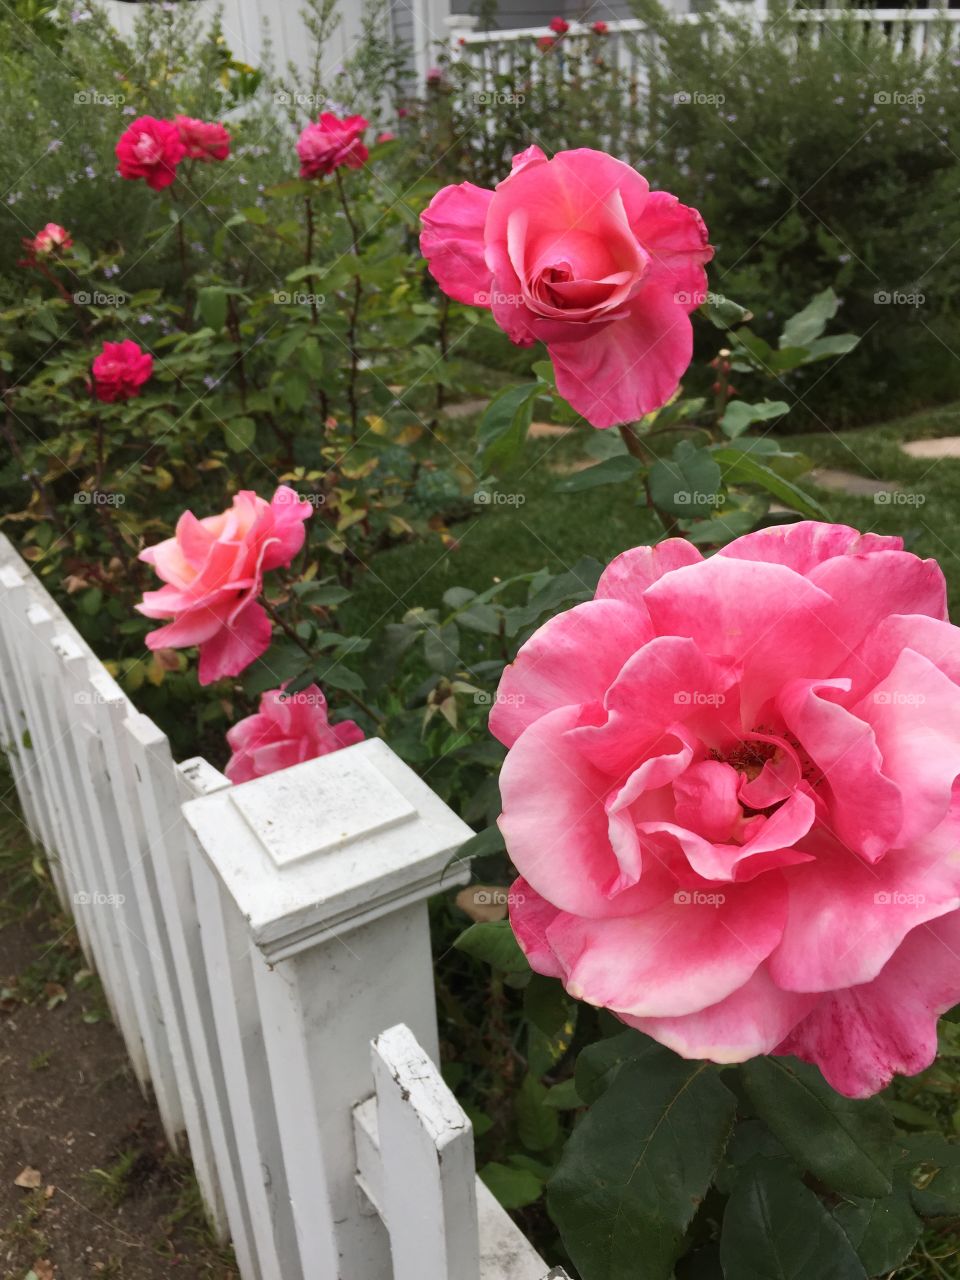 White picket fence and rose garden
